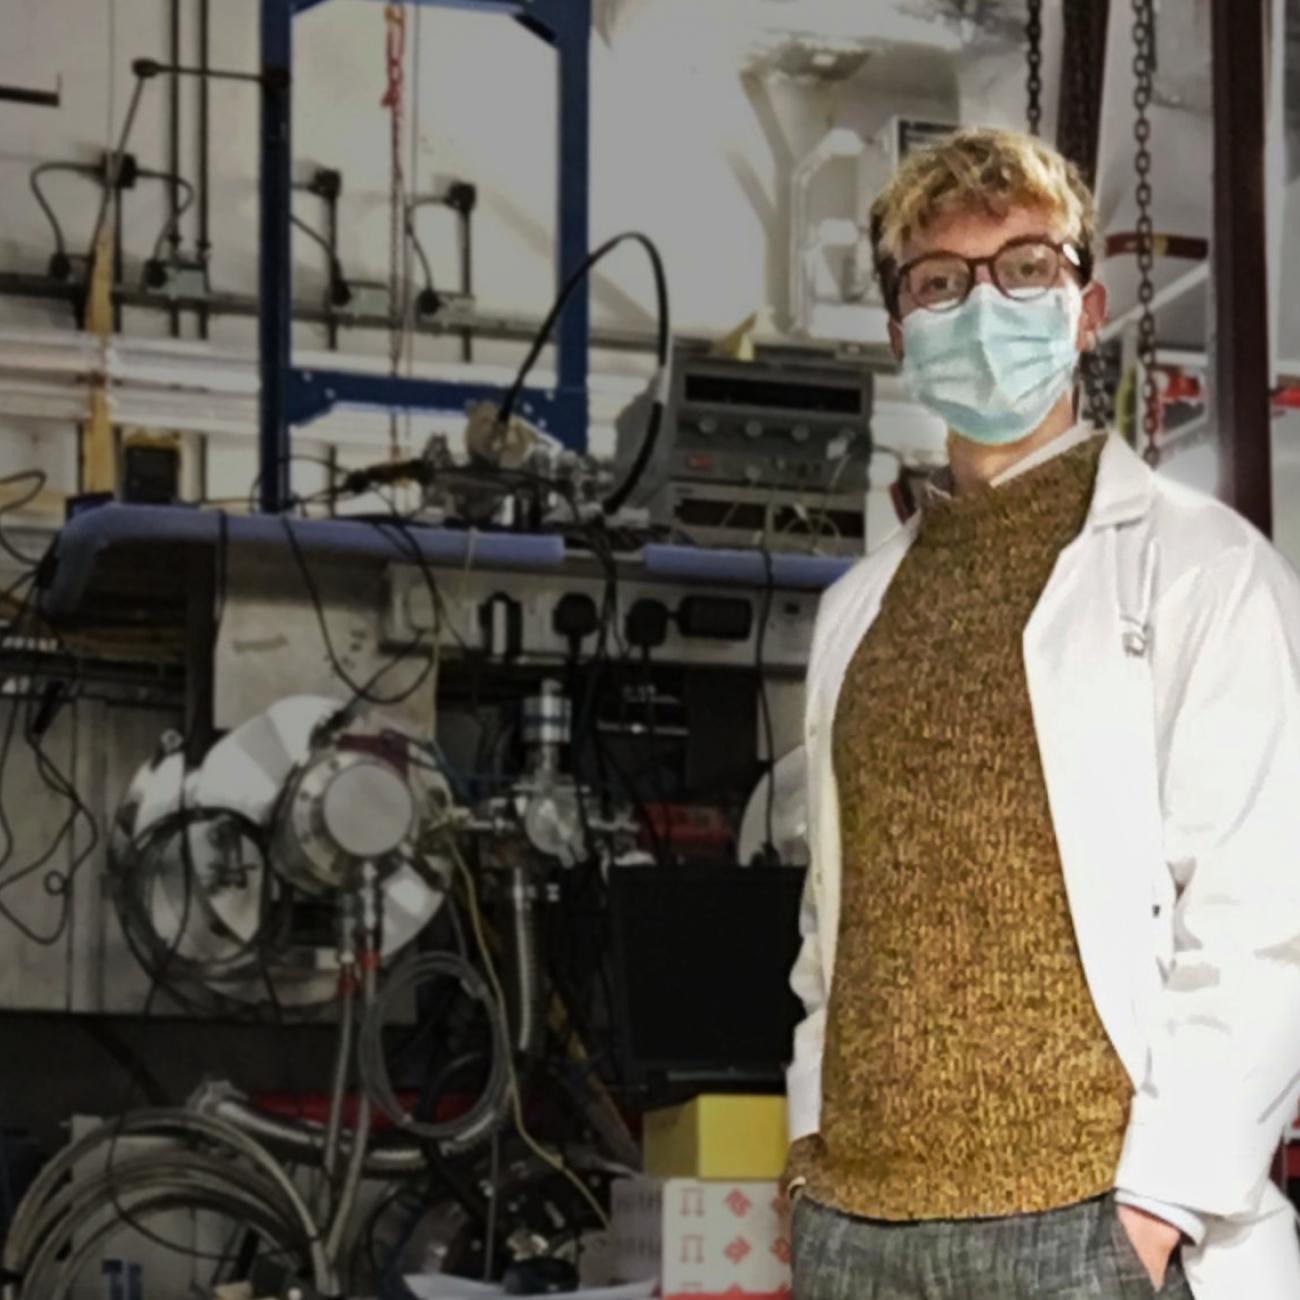 Engineering student Oliver Hitchens in a lab coat and mask in front of lab equipment